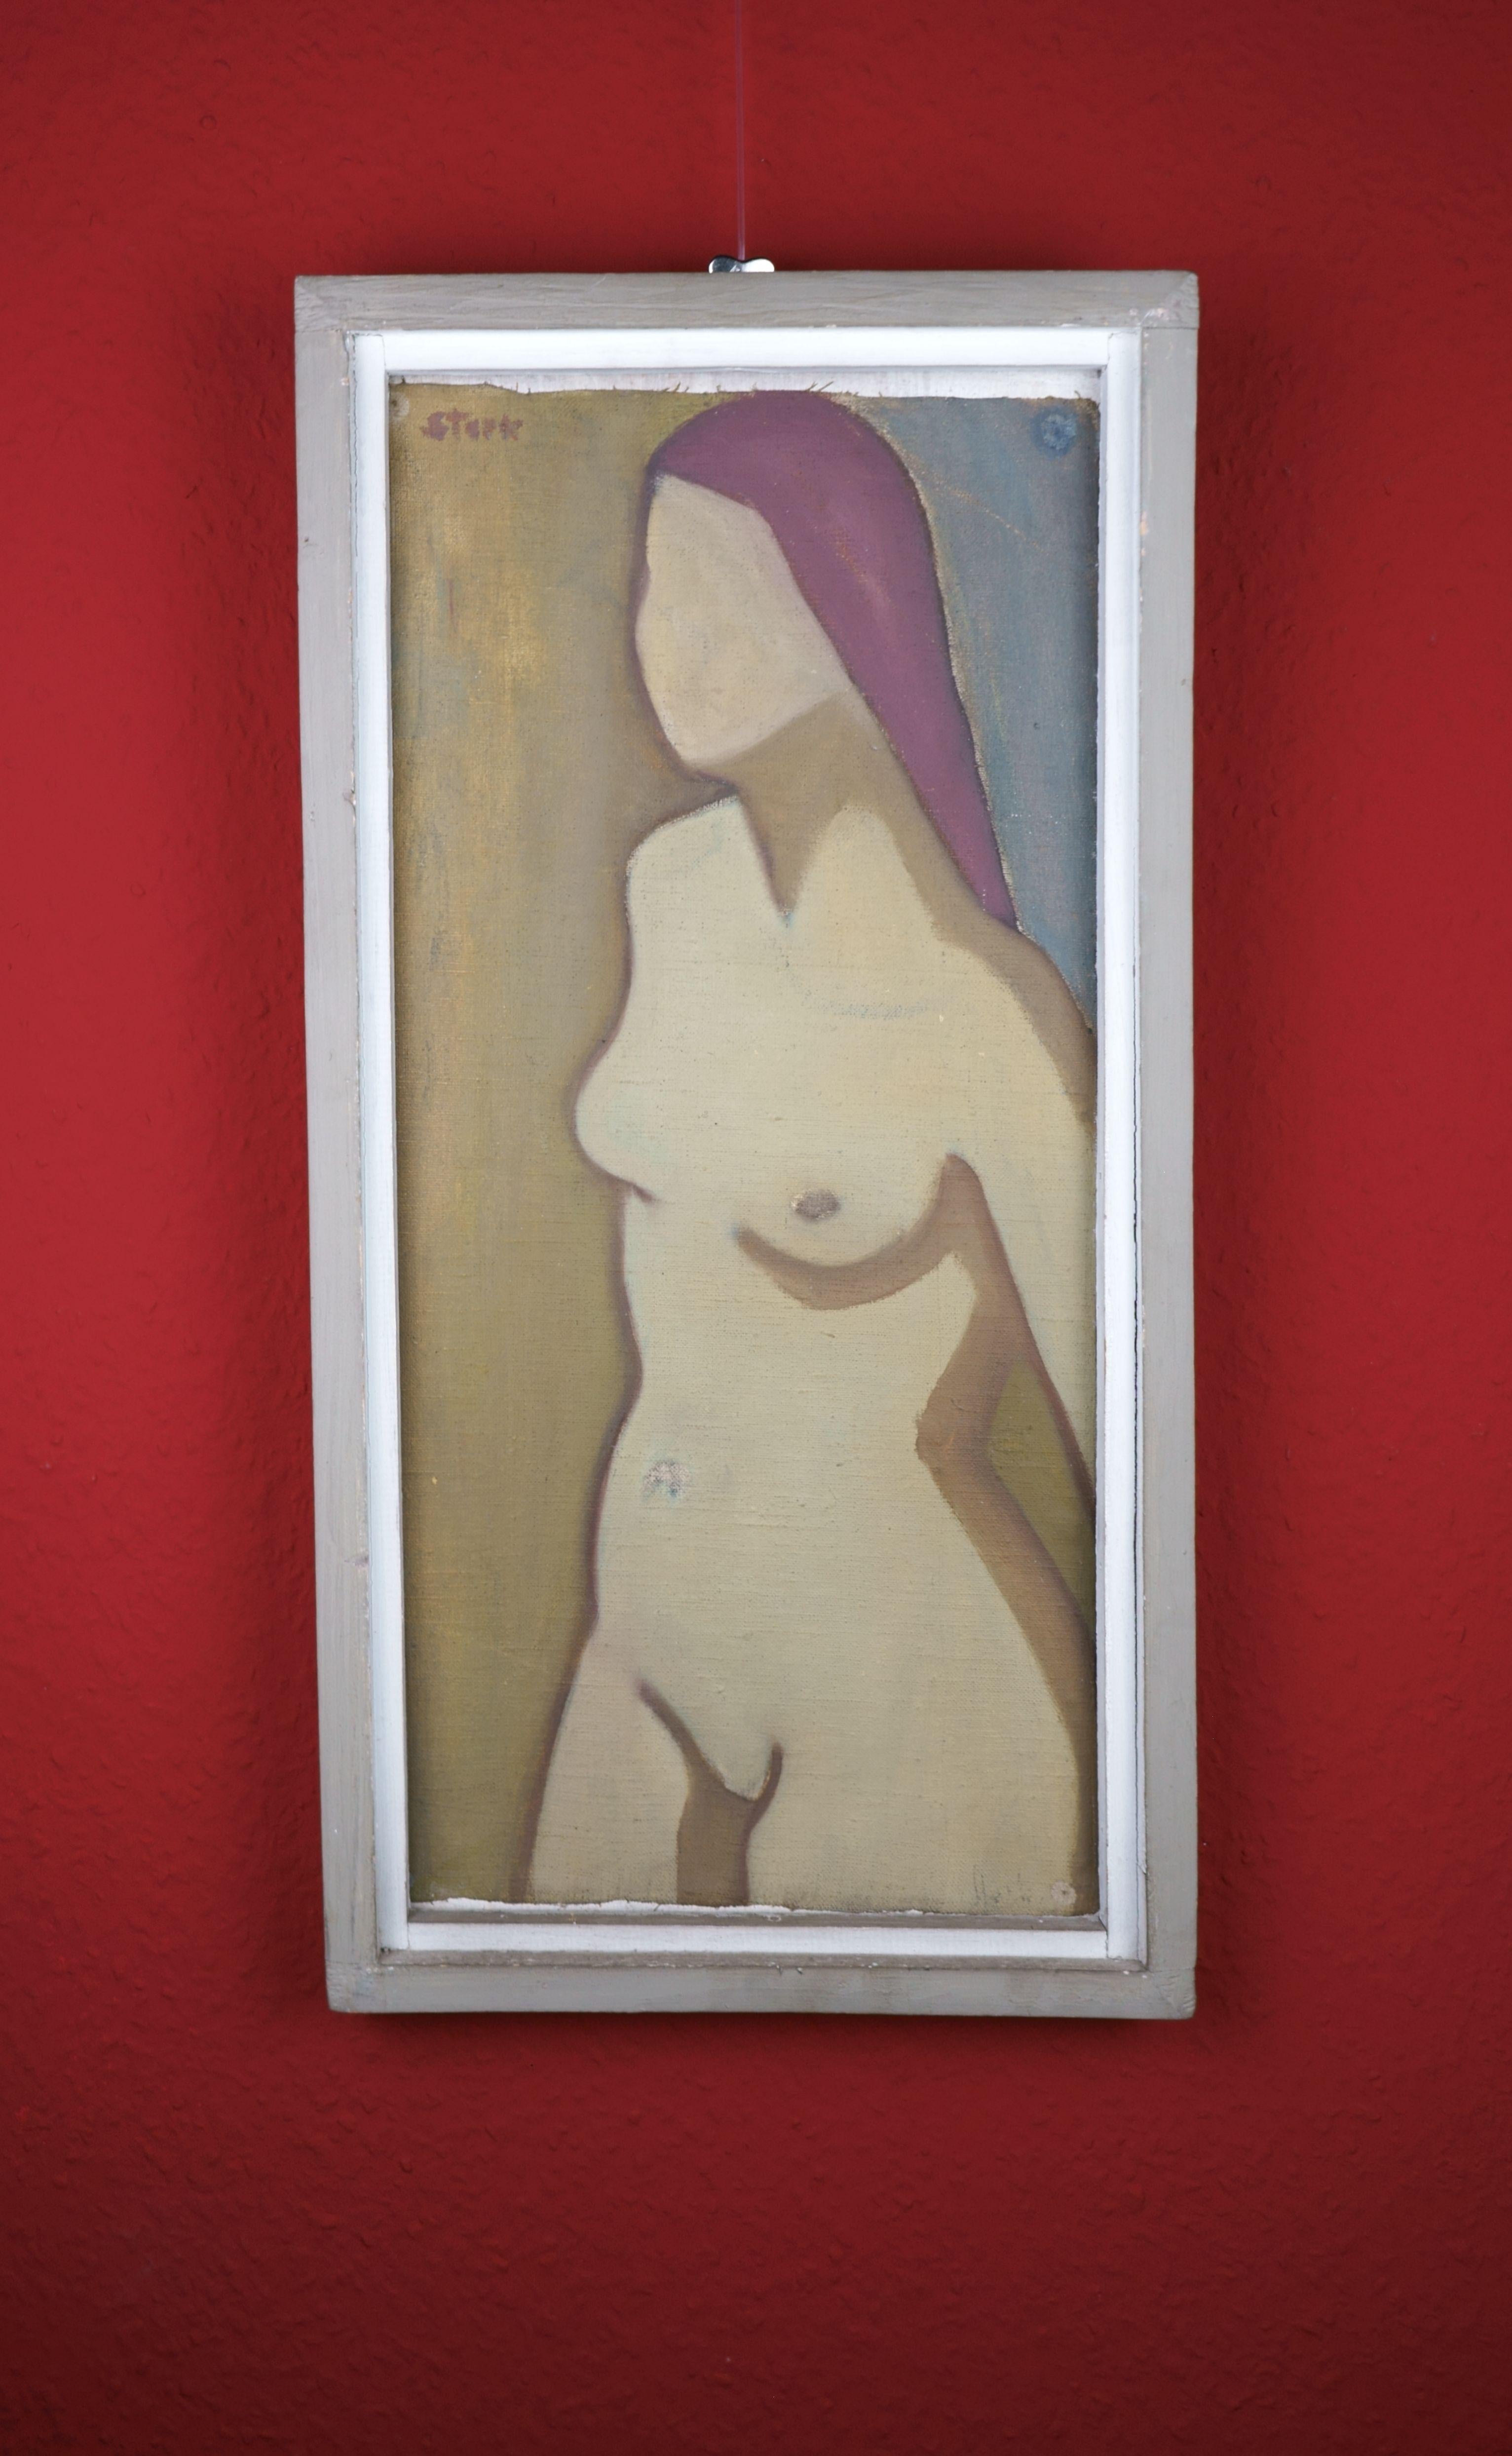 Gustl Stark (1917 Mainz - 2009 ibid.), Small Nude, 1946. Oil on canvas, marouflaged, 54 x 25 cm (picture), 30 x 60 cm (frame), signed 